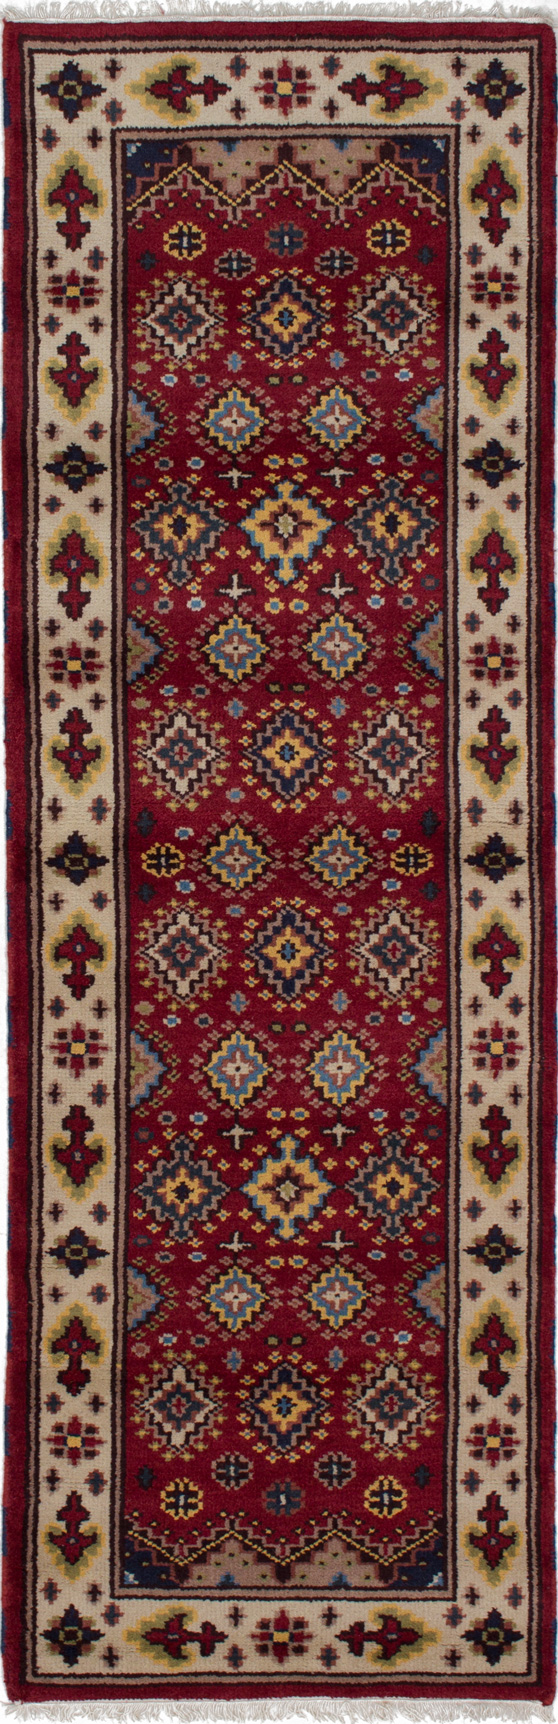 Hand-knotted Royal Kazak Red Wool Rug 2'7" x 7'11"  Size: 2'7" x 7'11"  